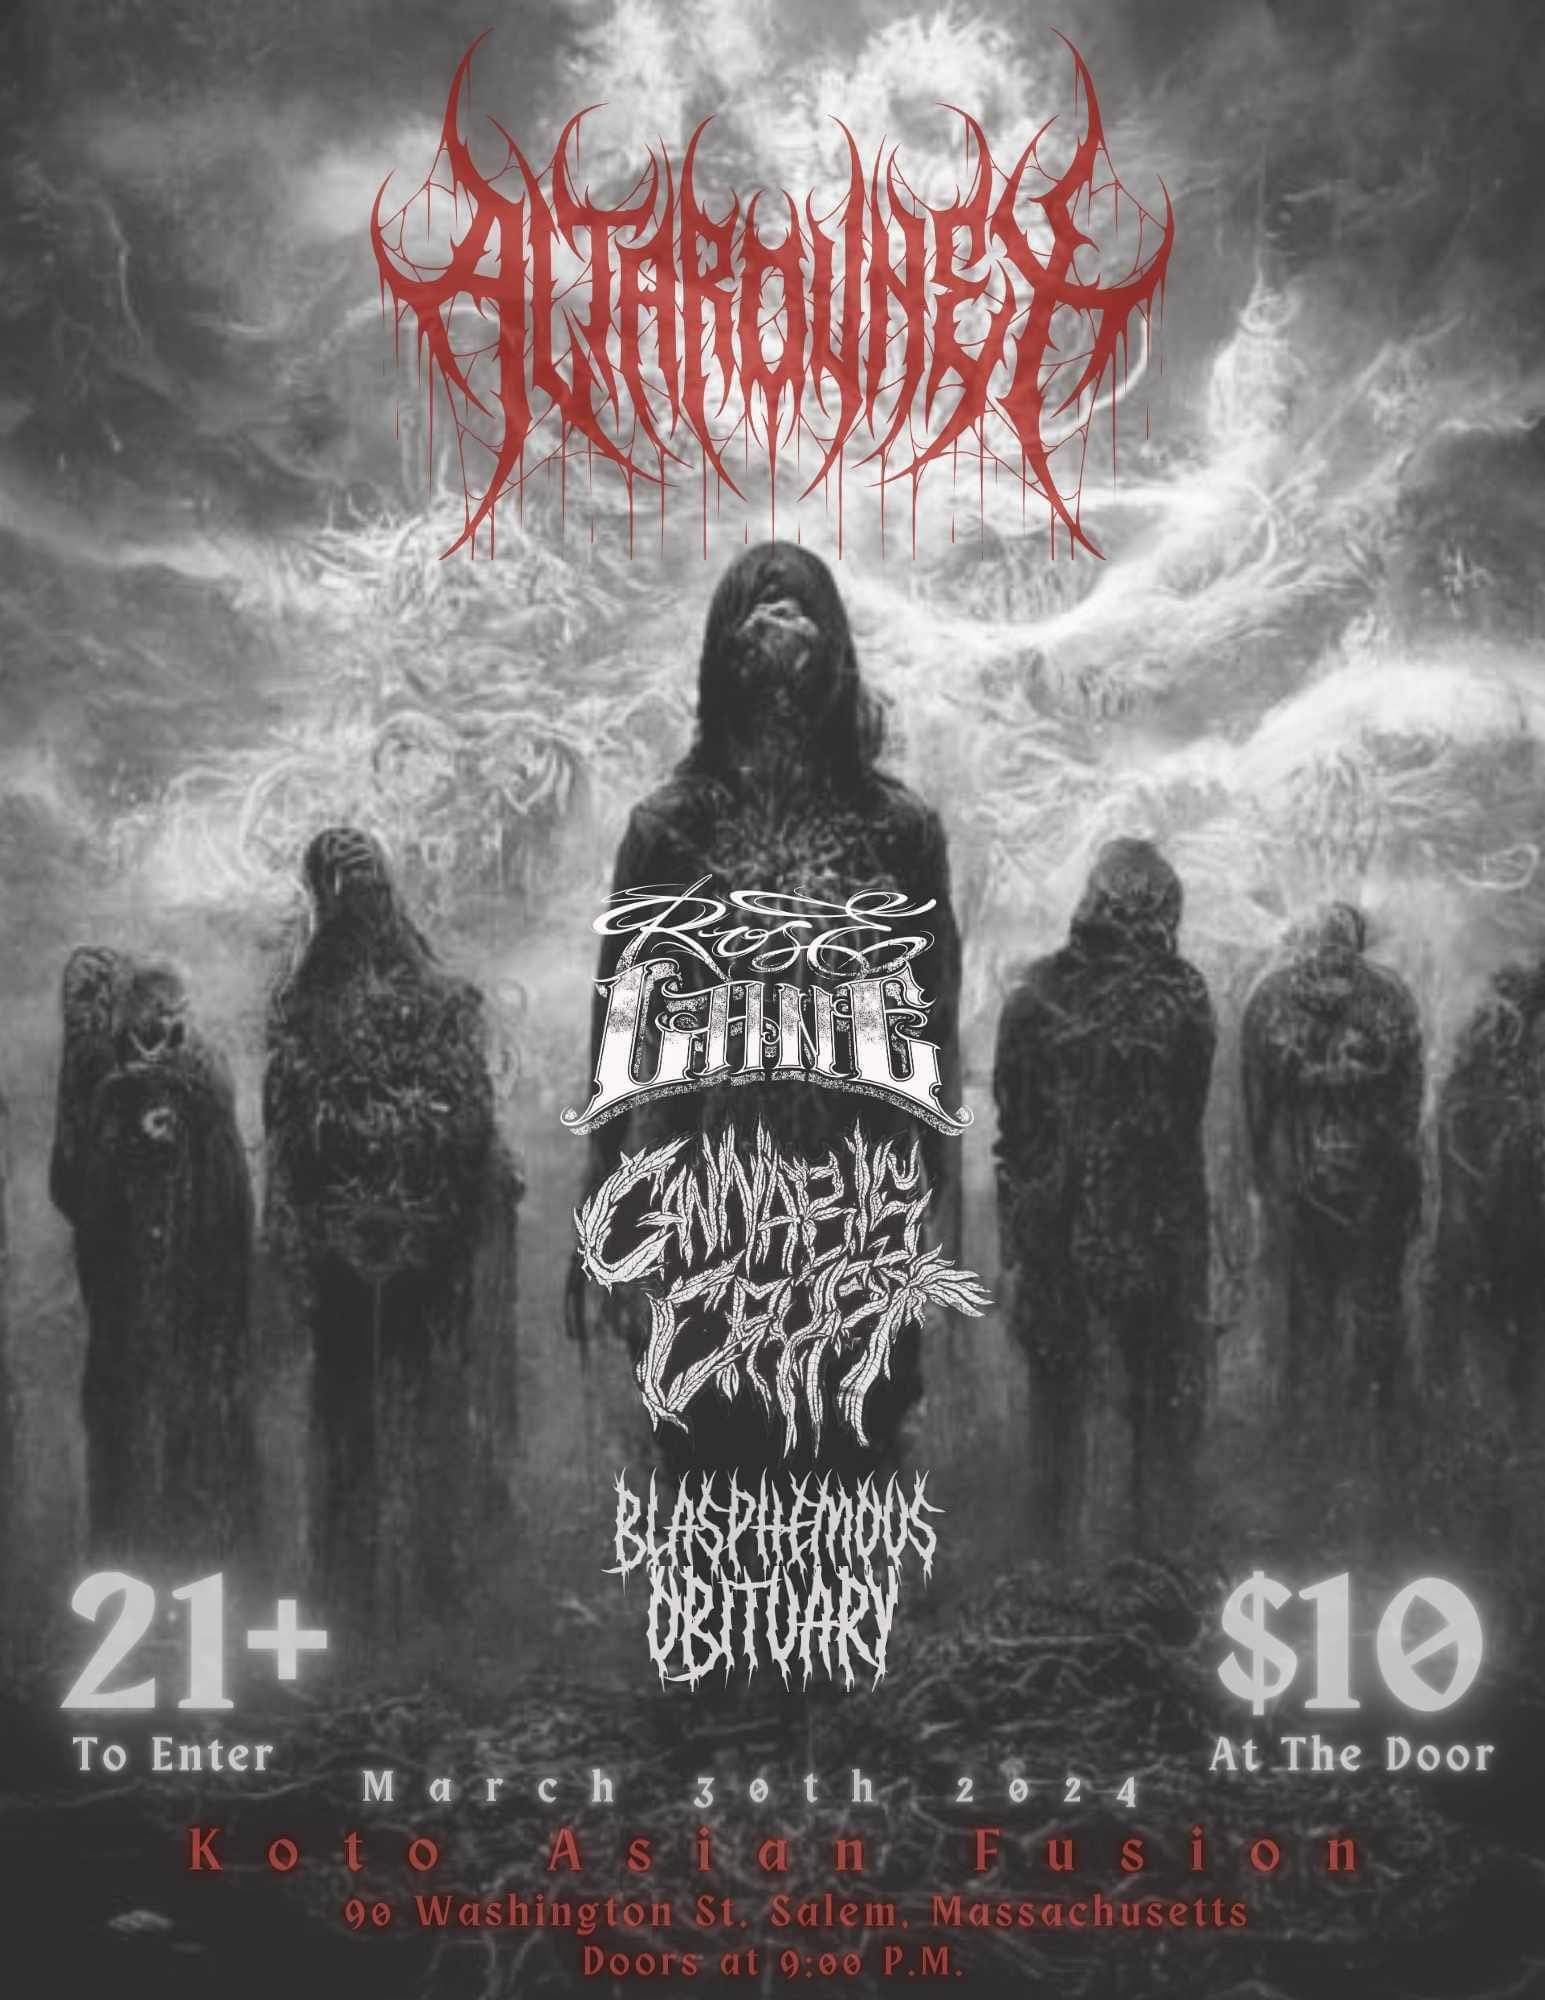 Promotional poster for the band "Pathogenic" showcasing a black and white image of mysterious hooded figures against a dark, mood-setting backdrop. The flyer highlights an exciting event with numerous bands participating. Essential details like the date and venue are provided as well.